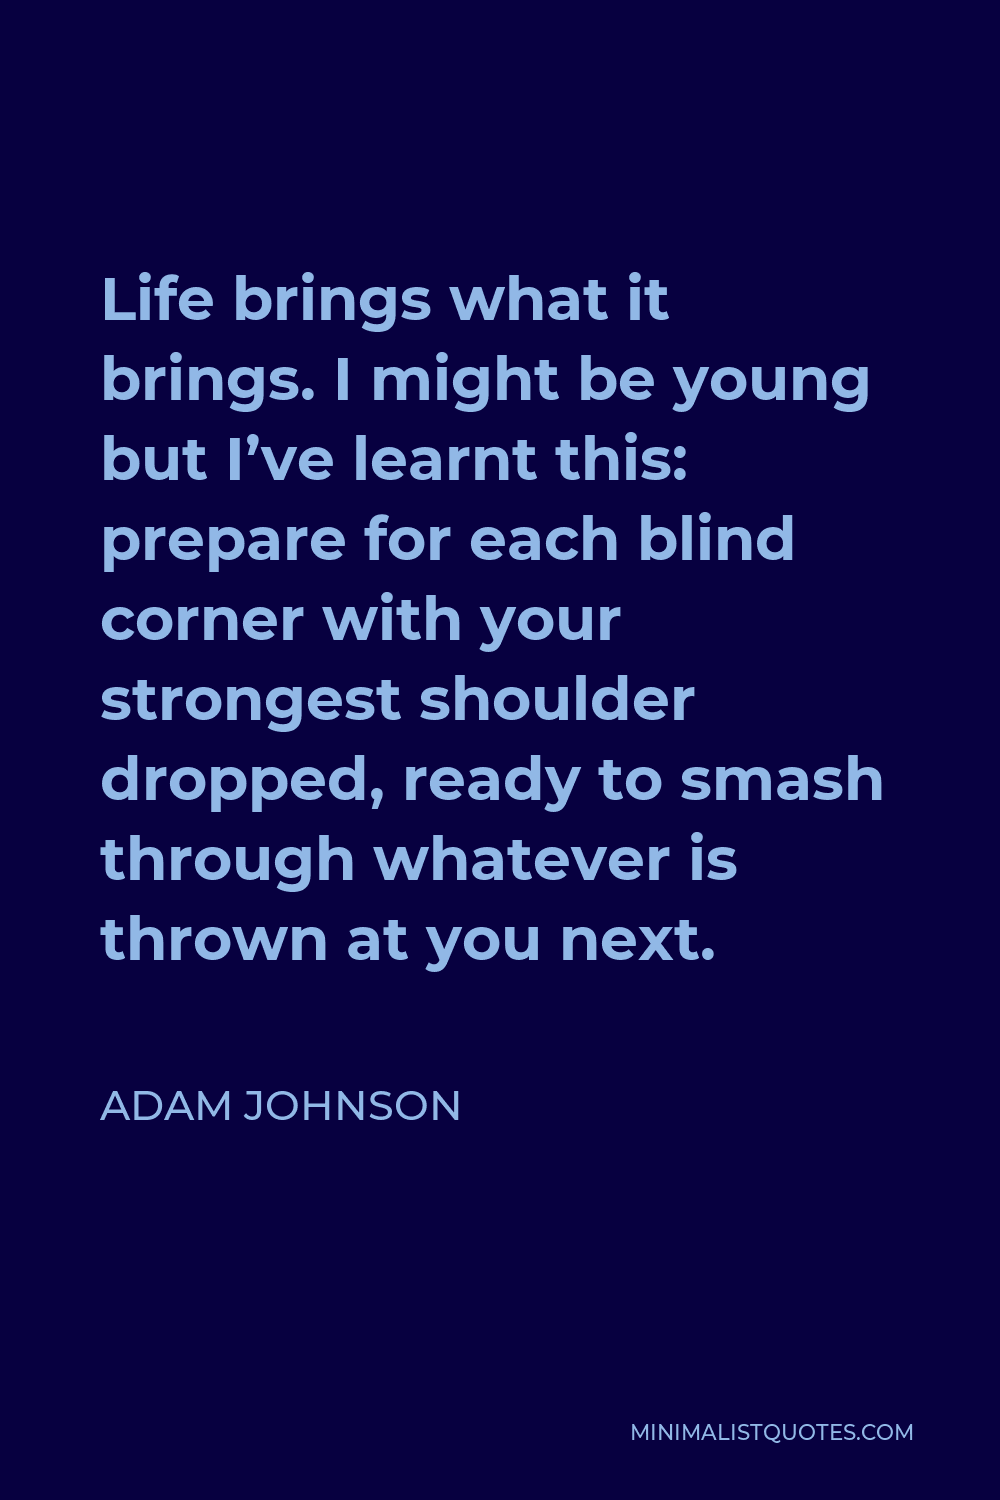 Adam Johnson Quote - Life brings what it brings. I might be young but I’ve learnt this: prepare for each blind corner with your strongest shoulder dropped, ready to smash through whatever is thrown at you next.